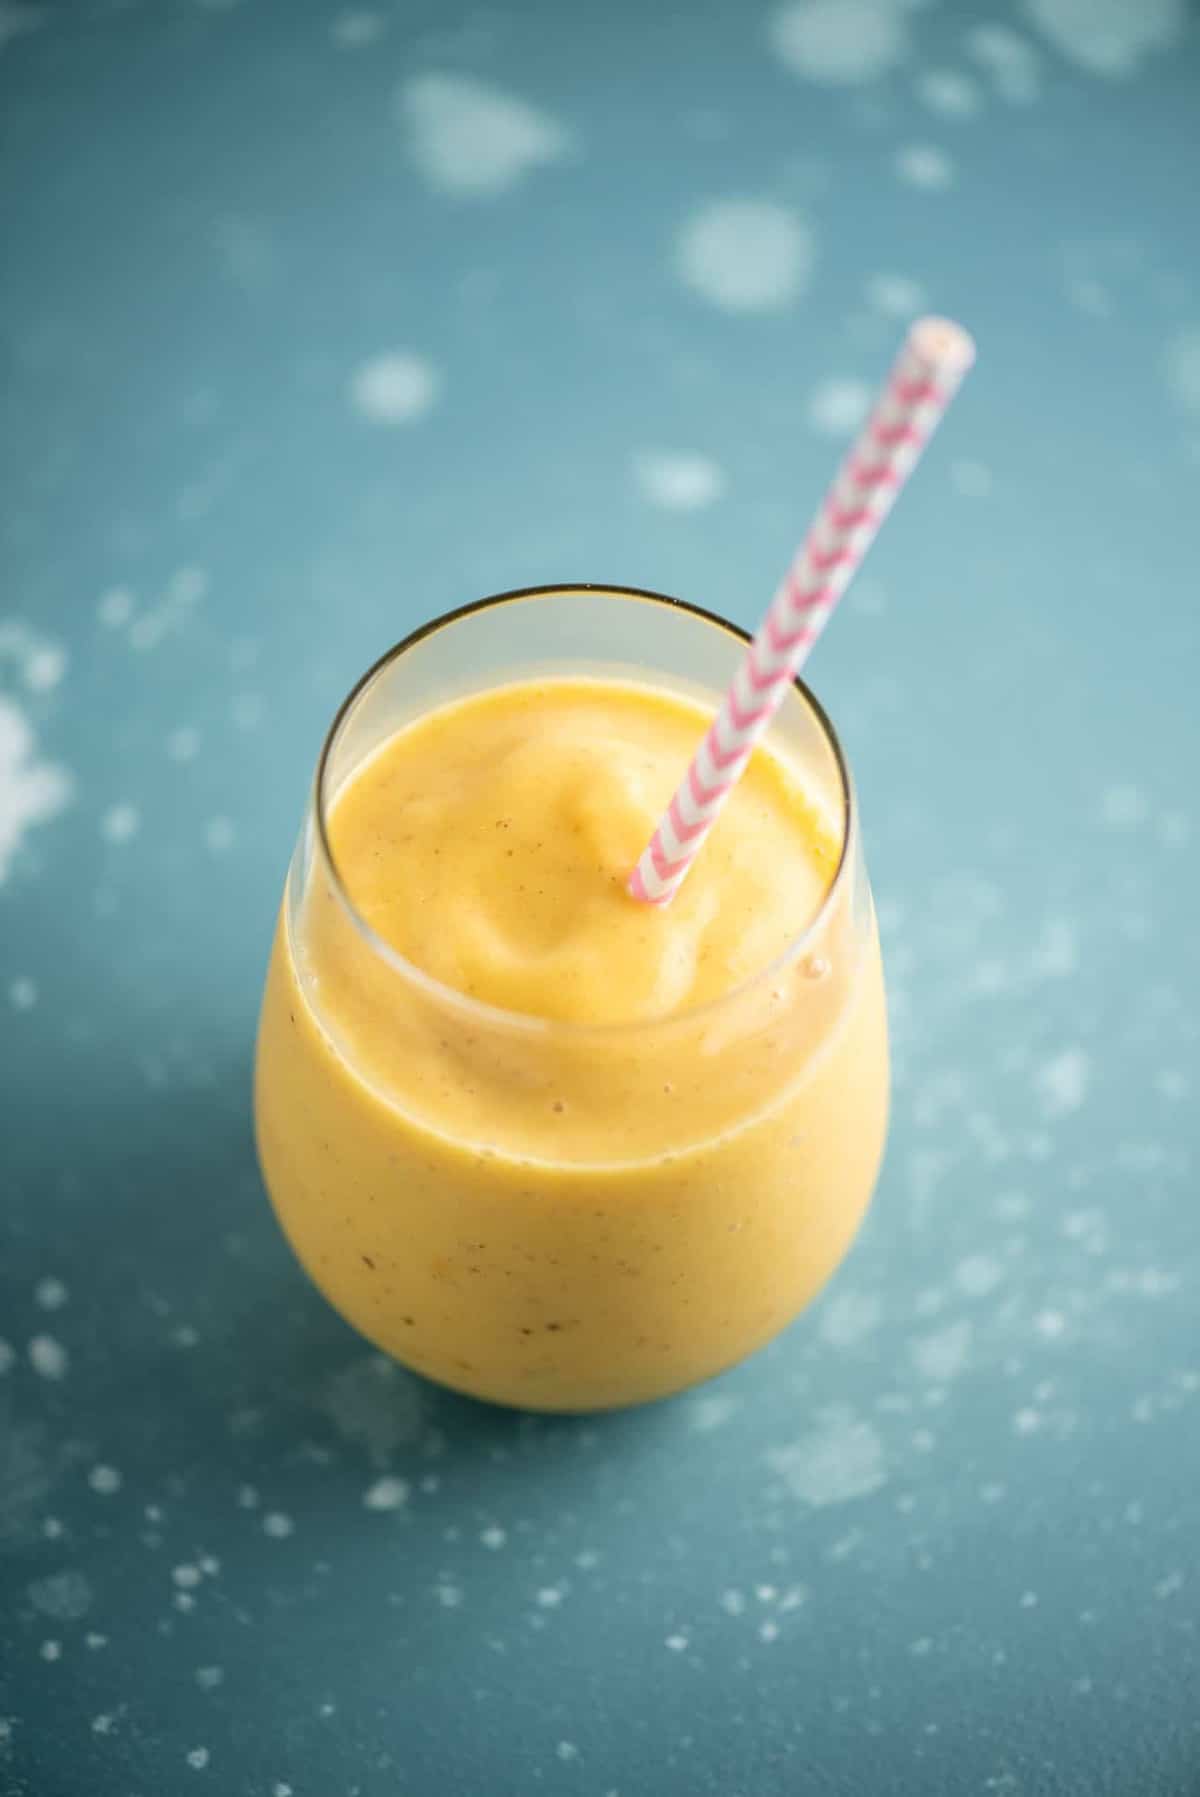 mango and pineapple smoothie in a glass with a pink straw